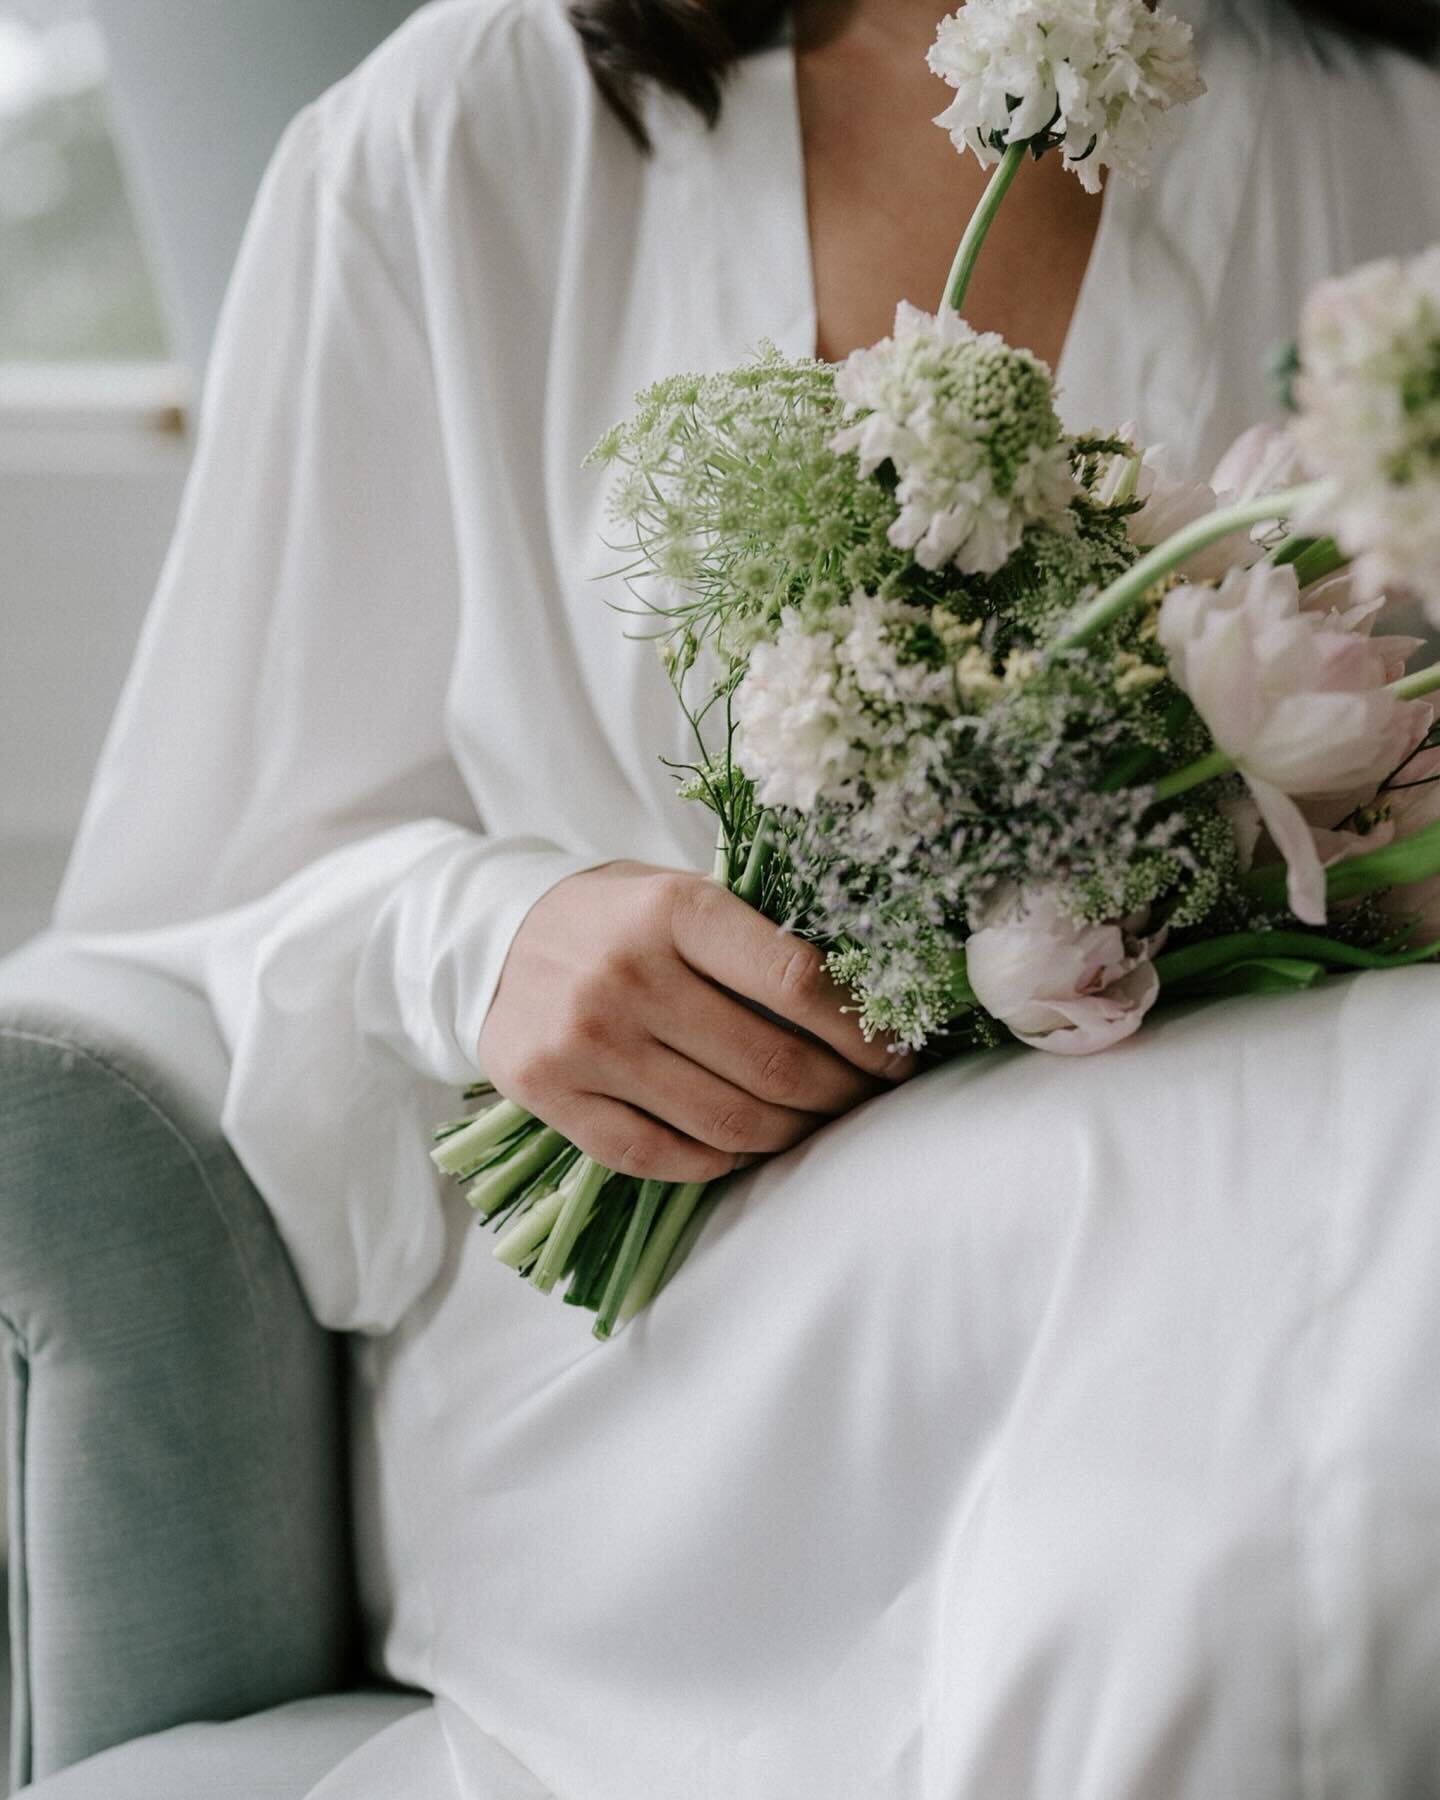 Bridal Prep Tips&hellip;.

&bull;Give yourself time, make sure you have time to capture the moments that are special to you. First looks, you in your beautiful dress. Having time means these moments aren&rsquo;t rushed and feel more relaxed.
&bull;Li